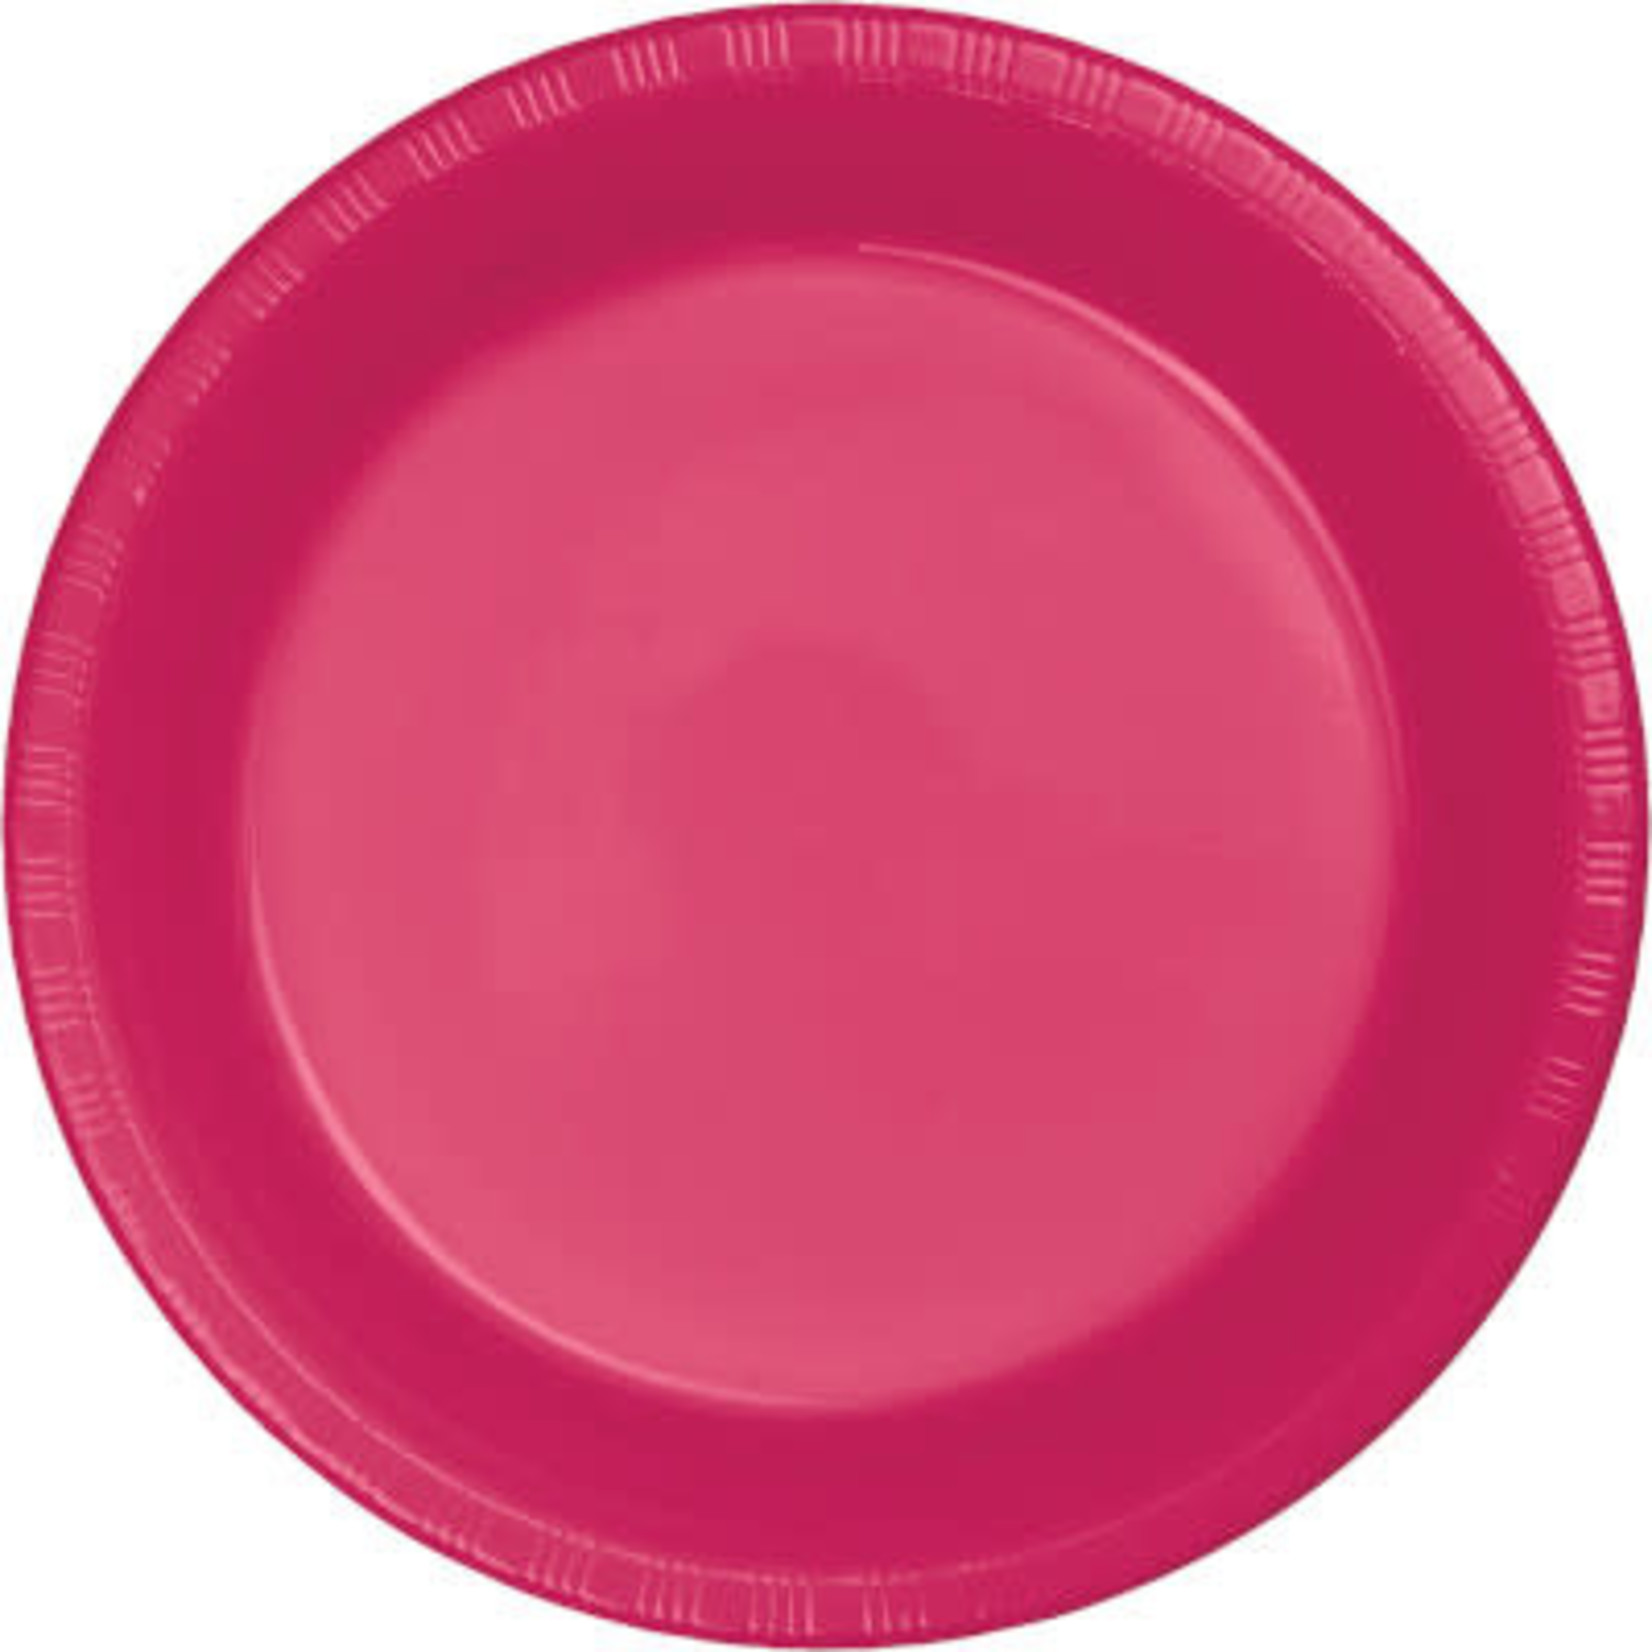 Touch of Color 10" Magenta Pink Plastic Banquet Plates - 20ct.